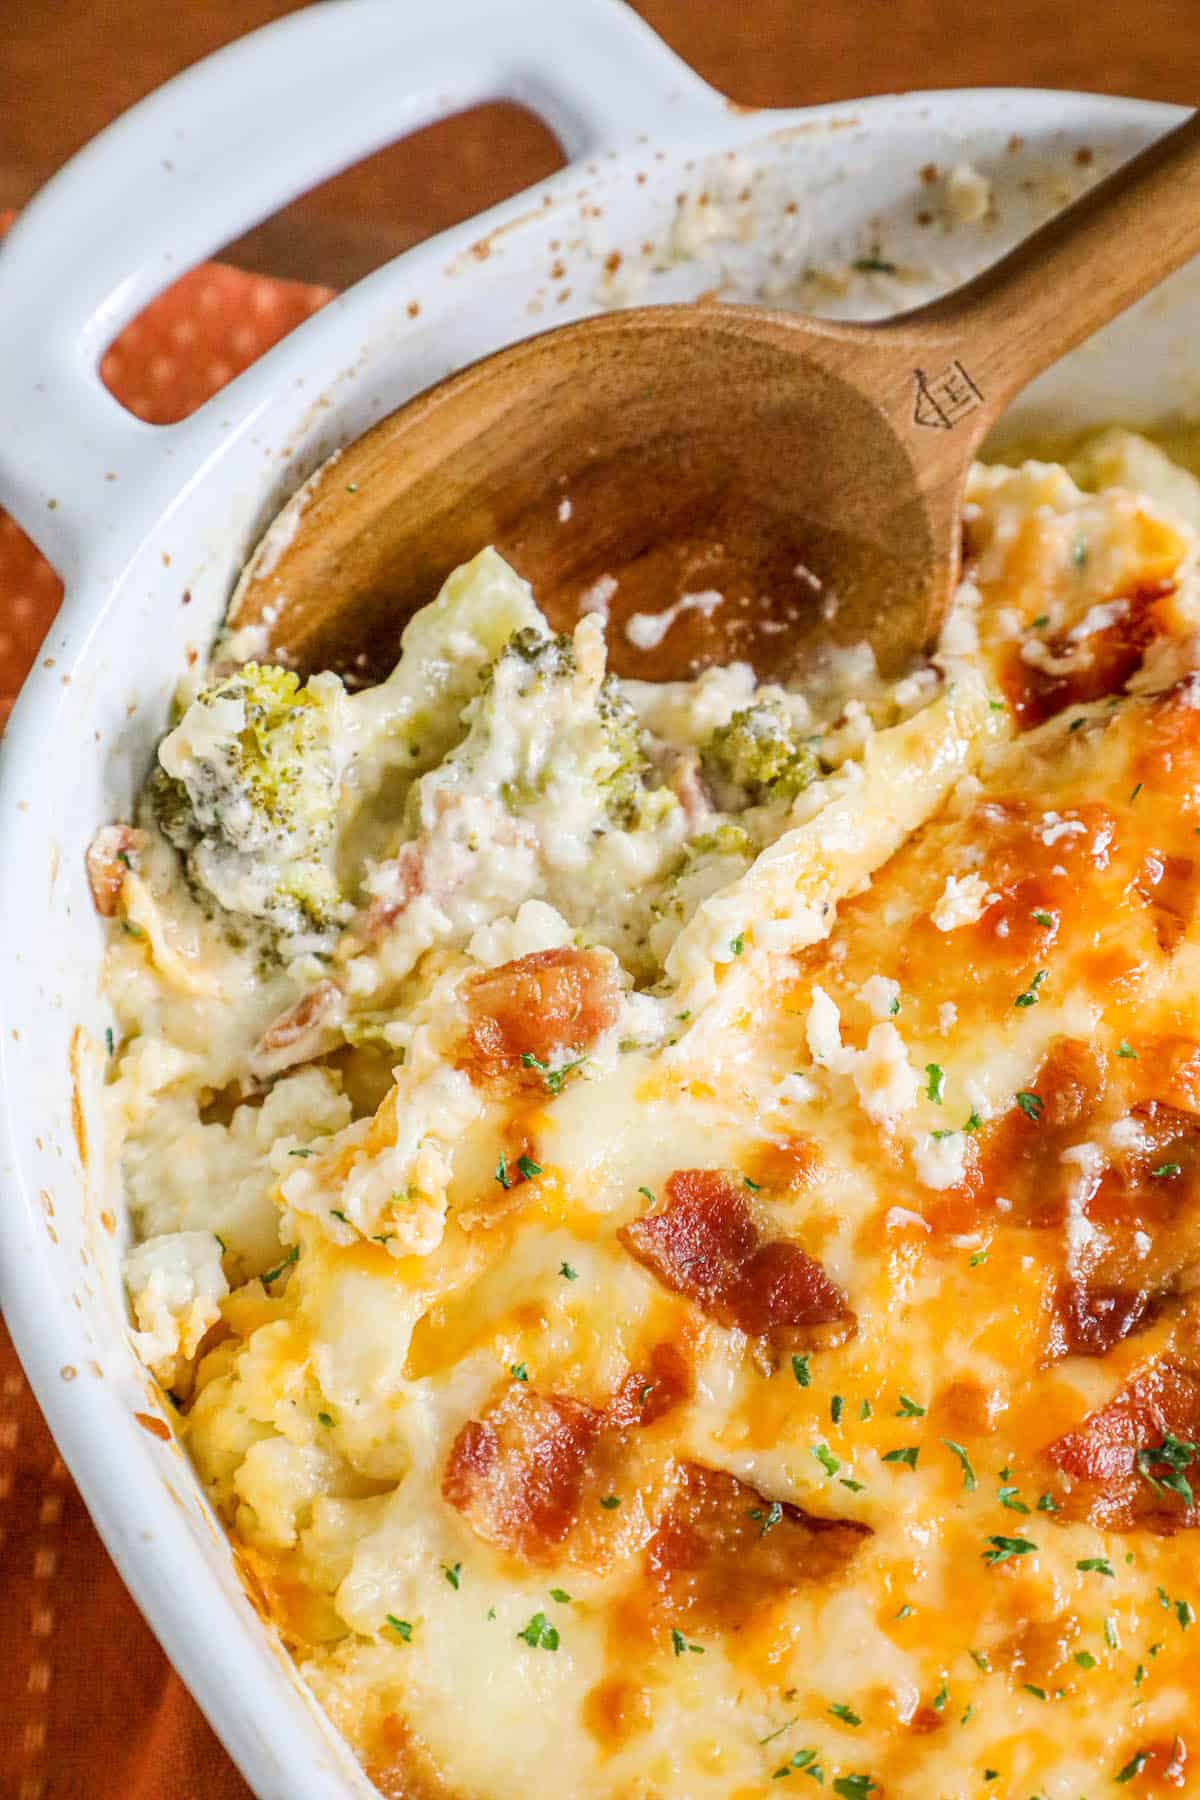 A broccoli casserole dish with cheese and bacon.